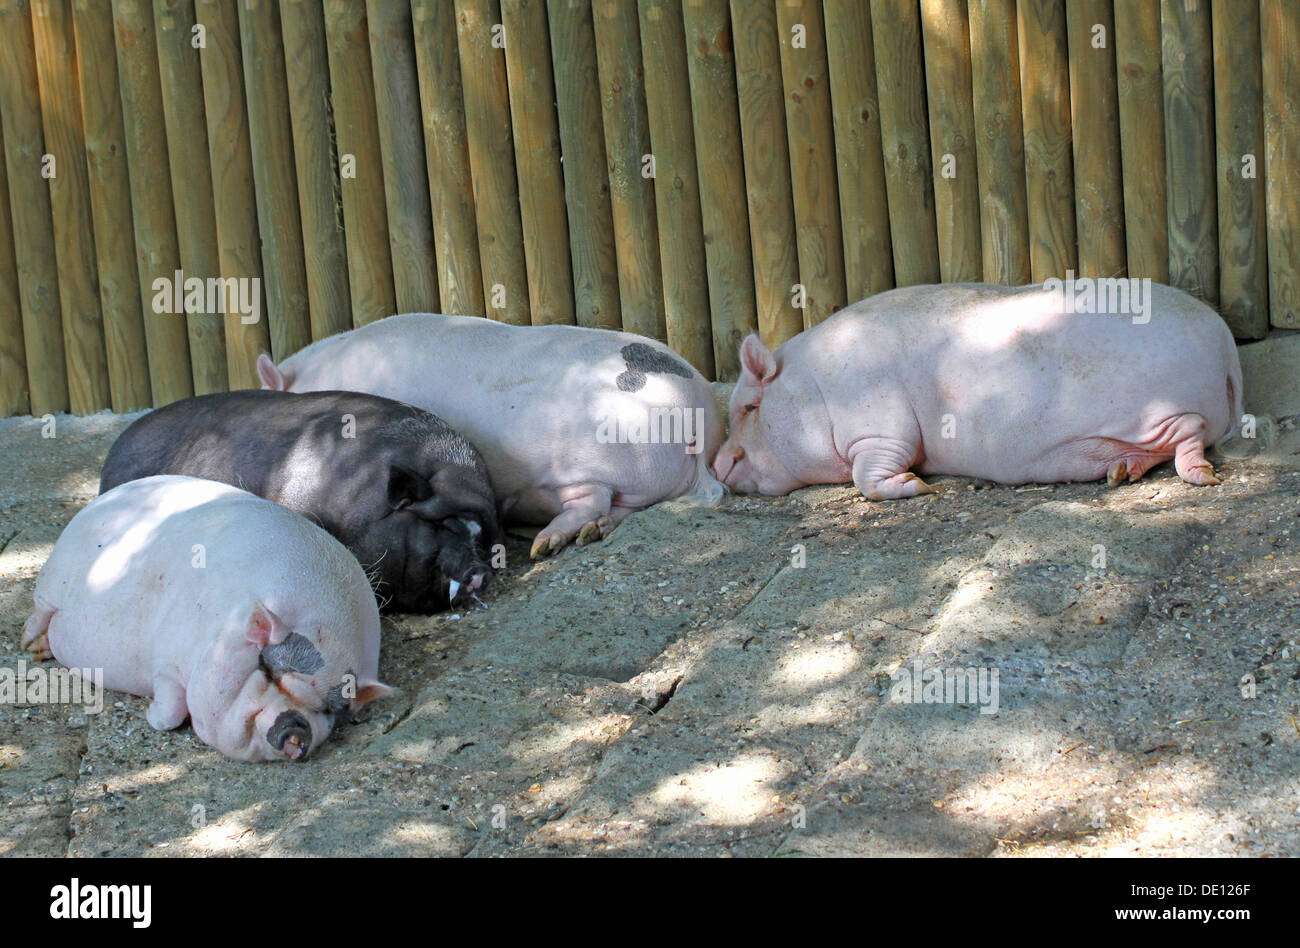 stye with many heavy pigs lying wearily on the mud Stock Photo